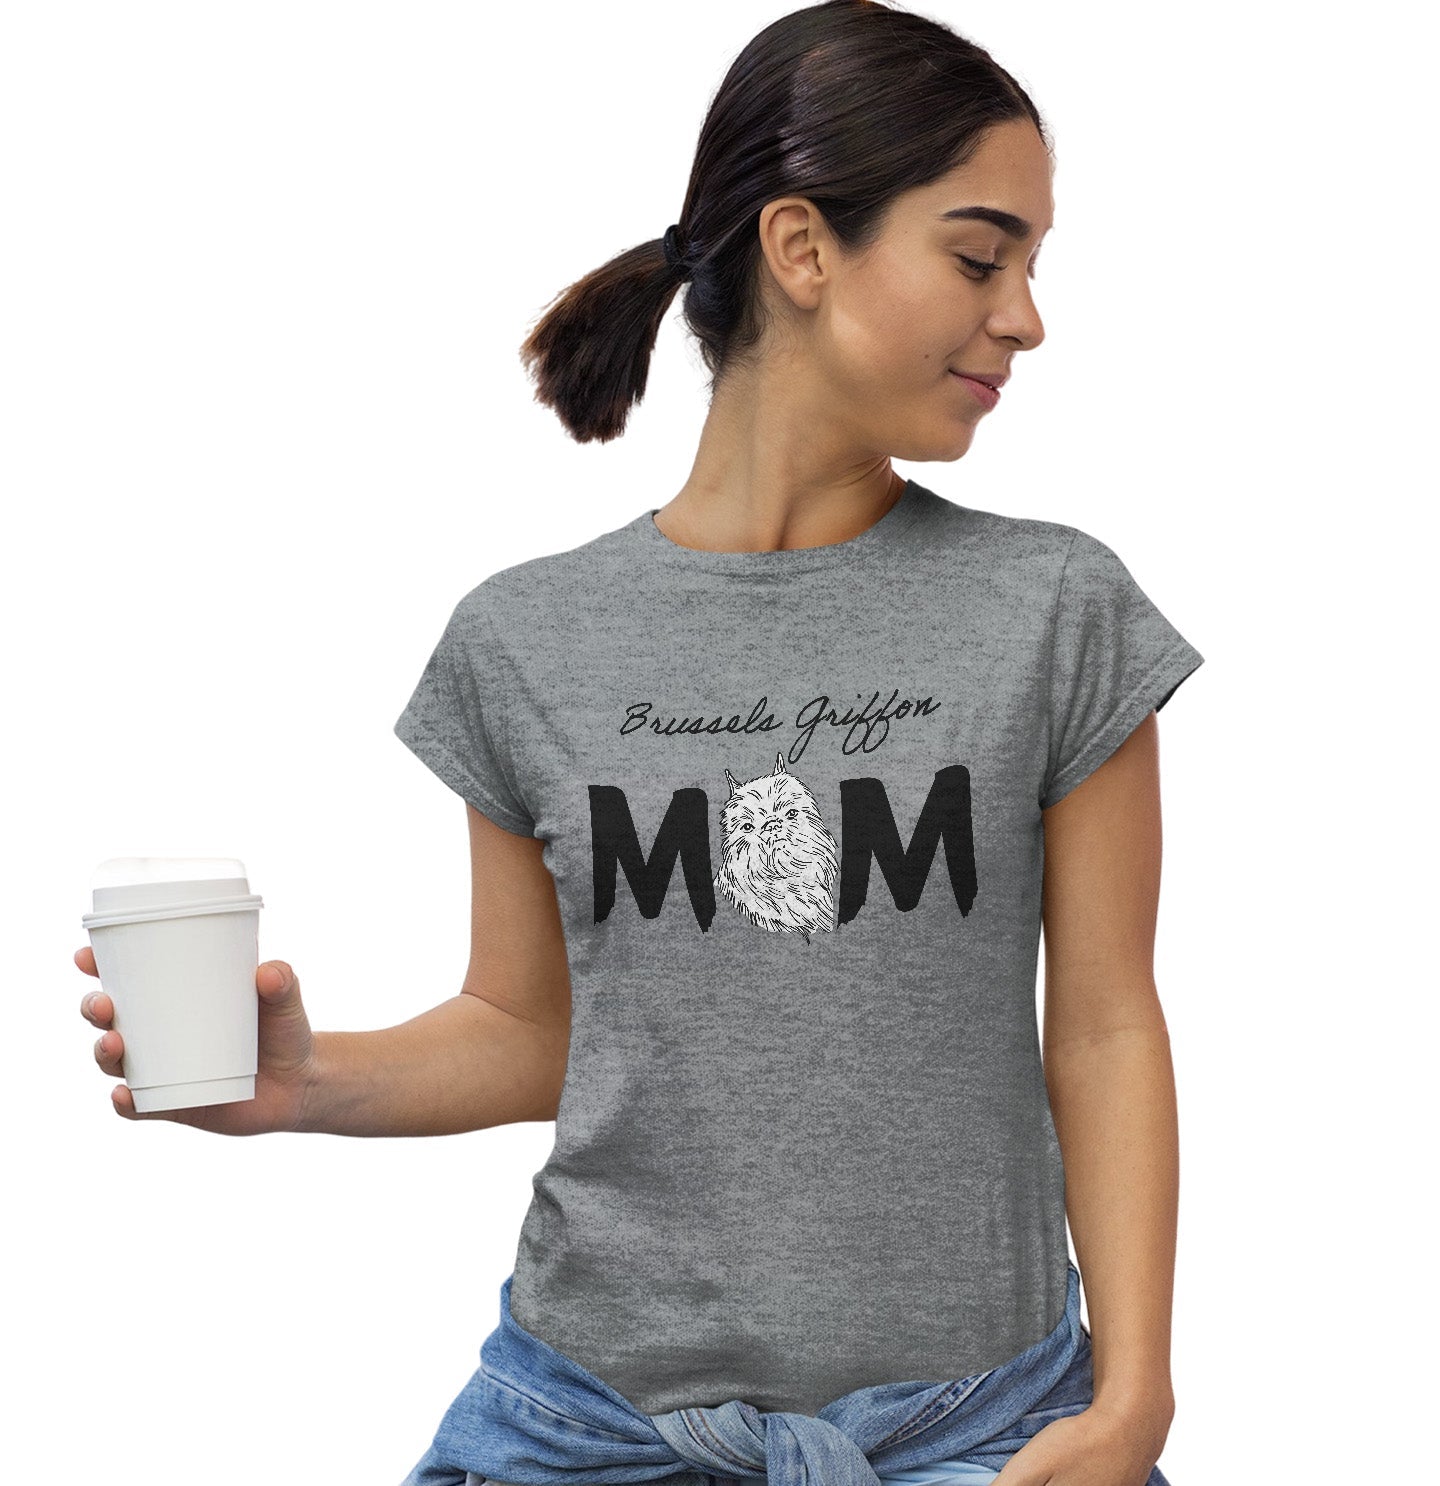 Brussels Griffon Breed Mom - Women's Fitted T-Shirt